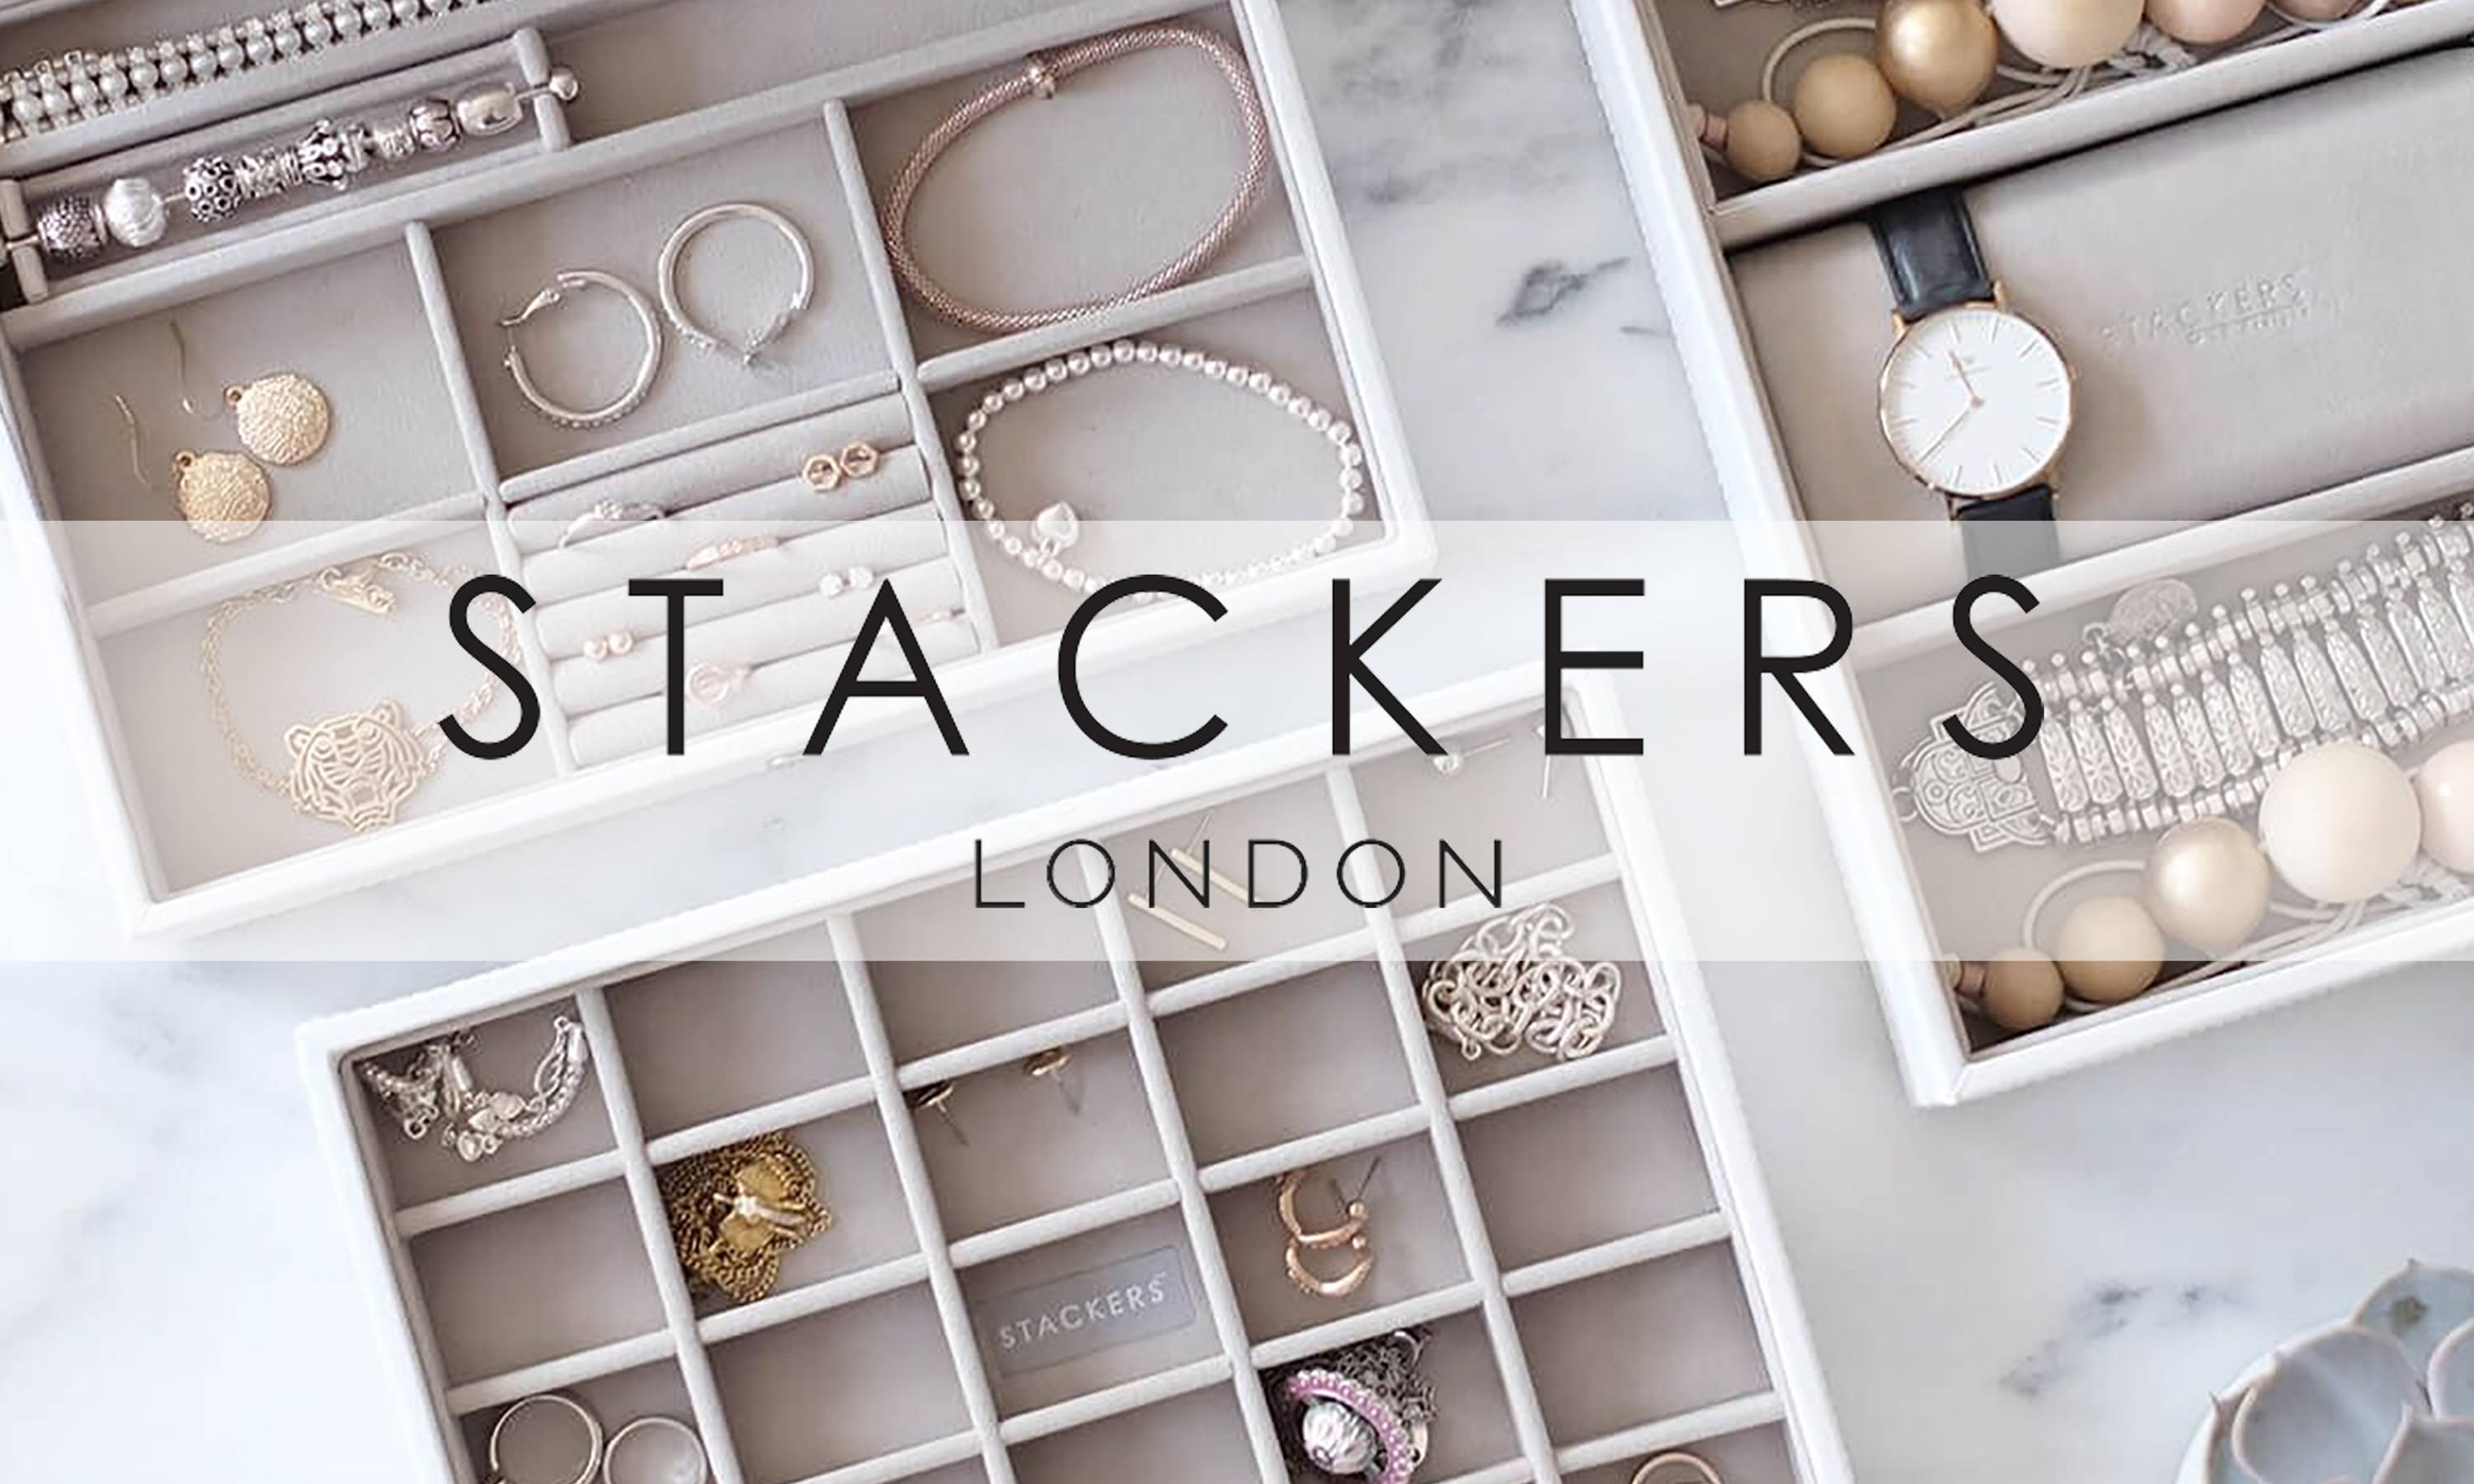 STACKERS